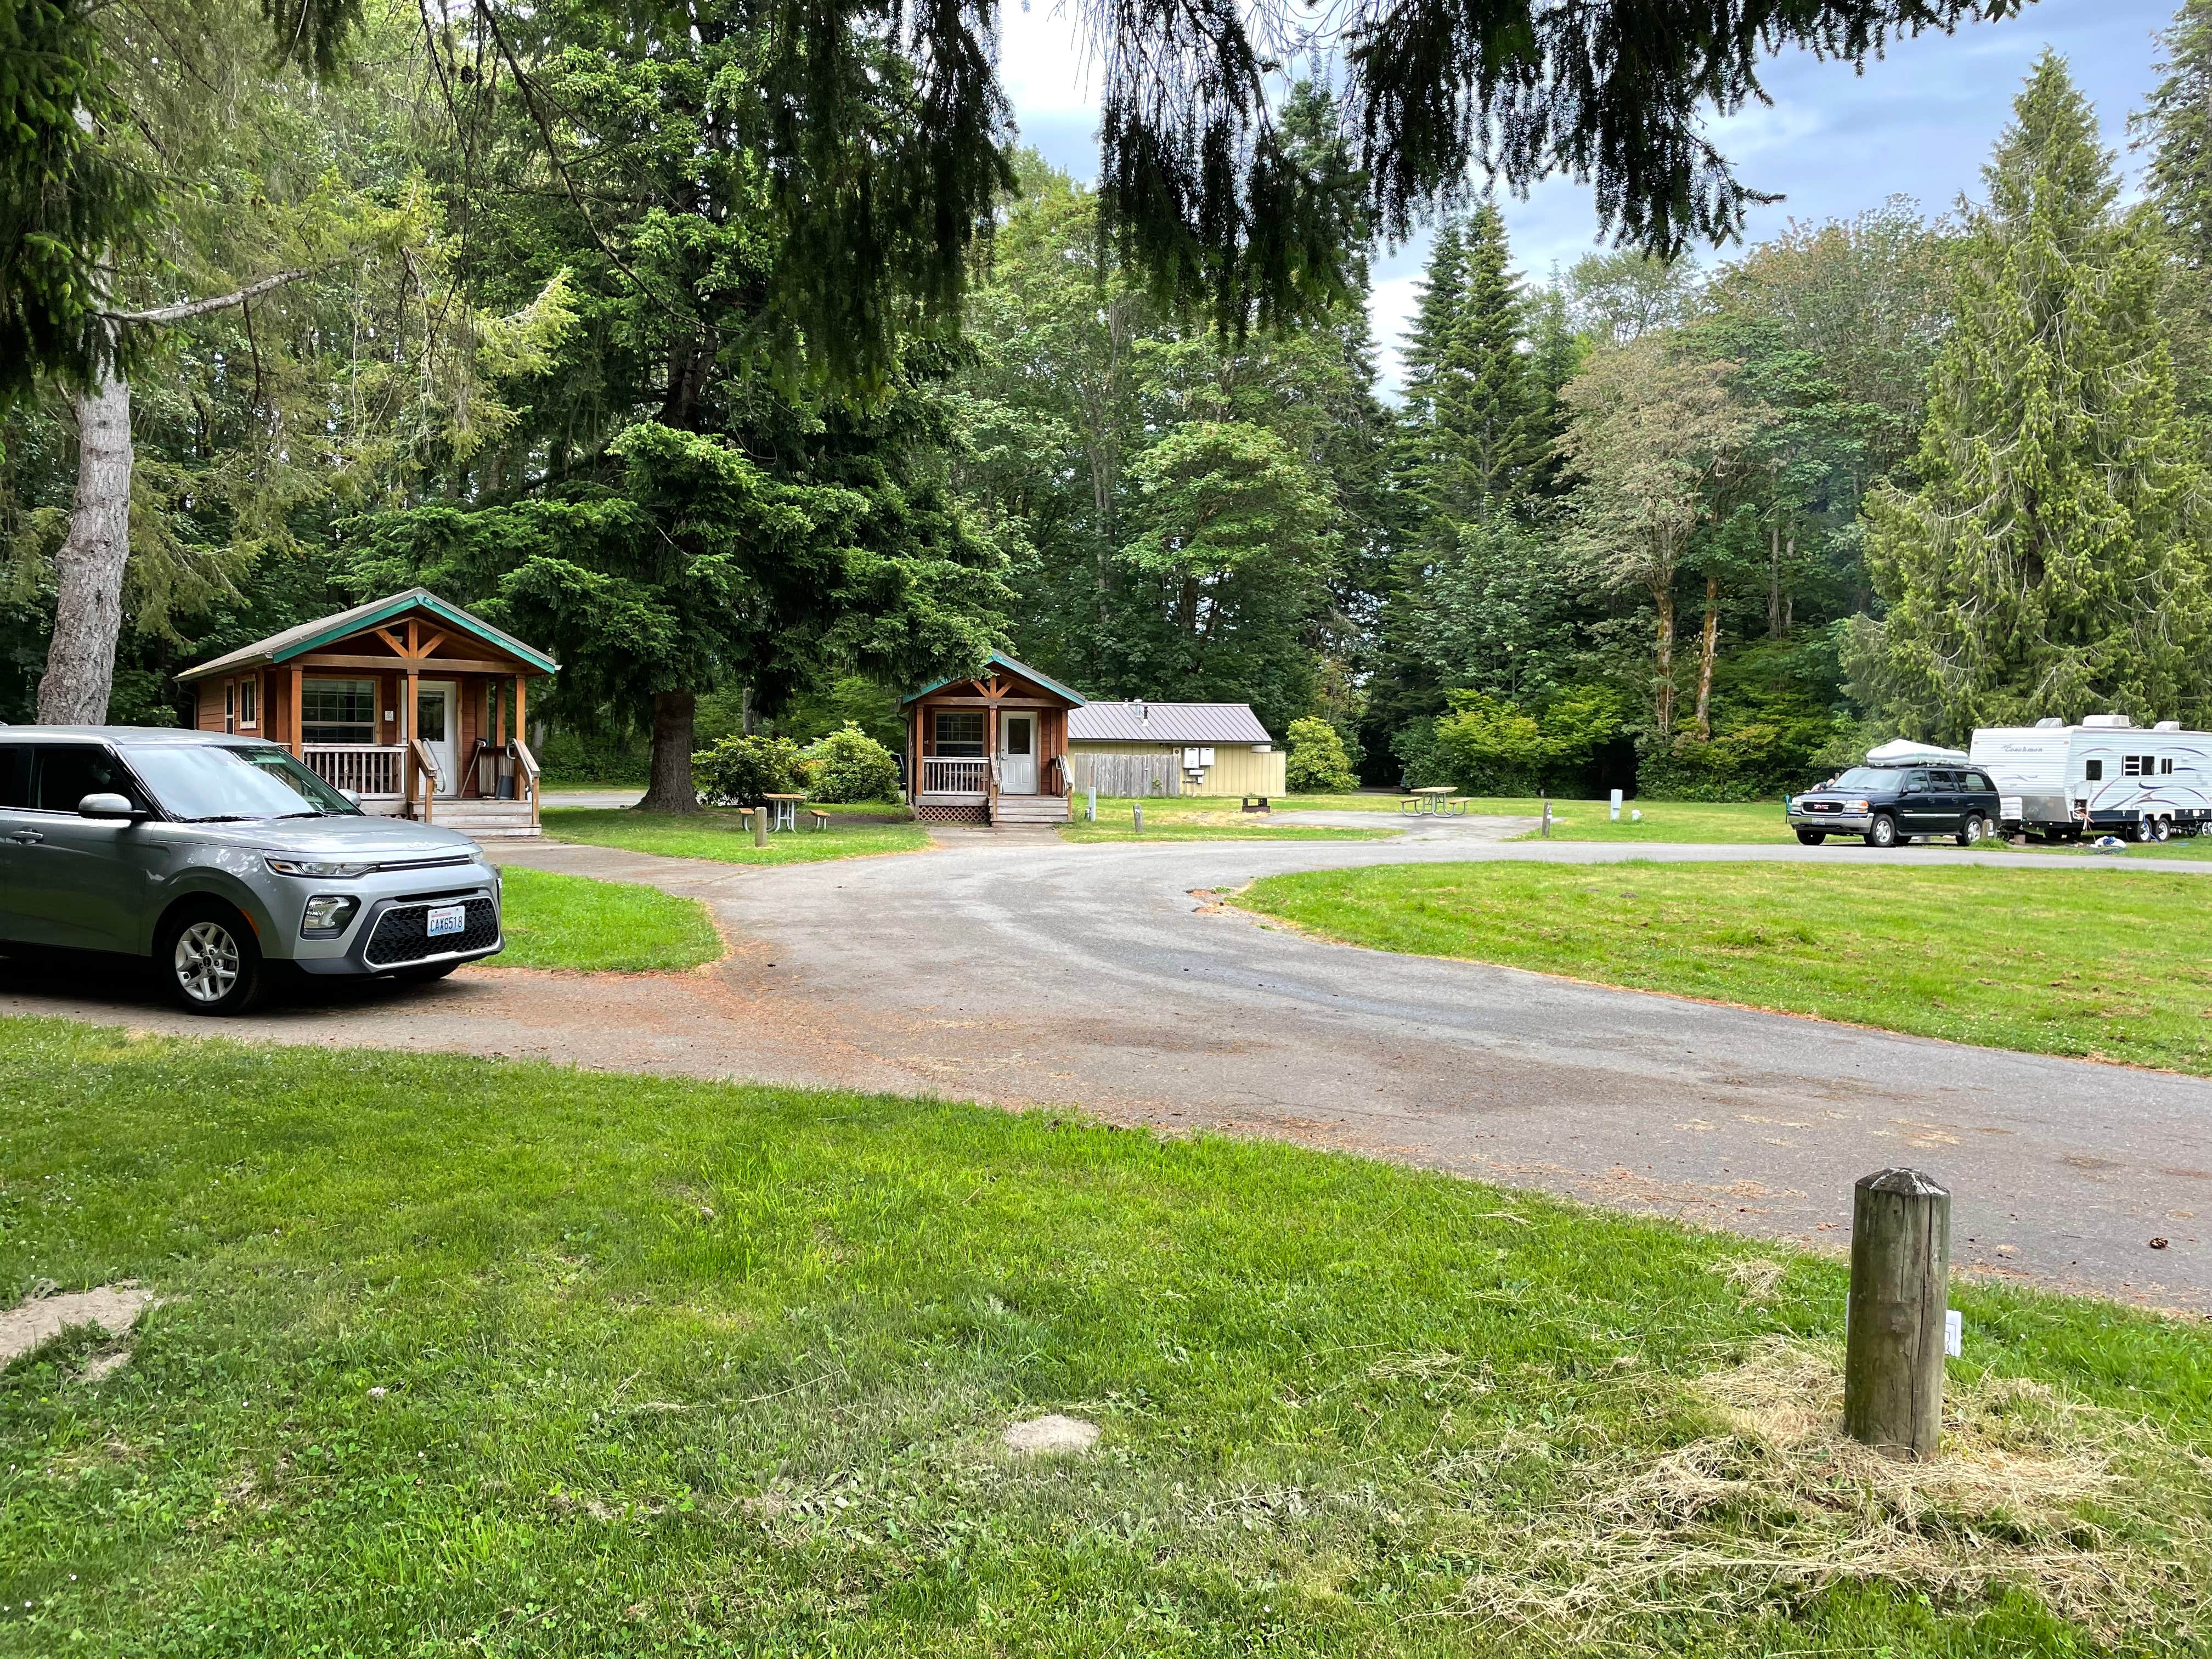 Camper submitted image from Dosewallips State Park Campground - 1